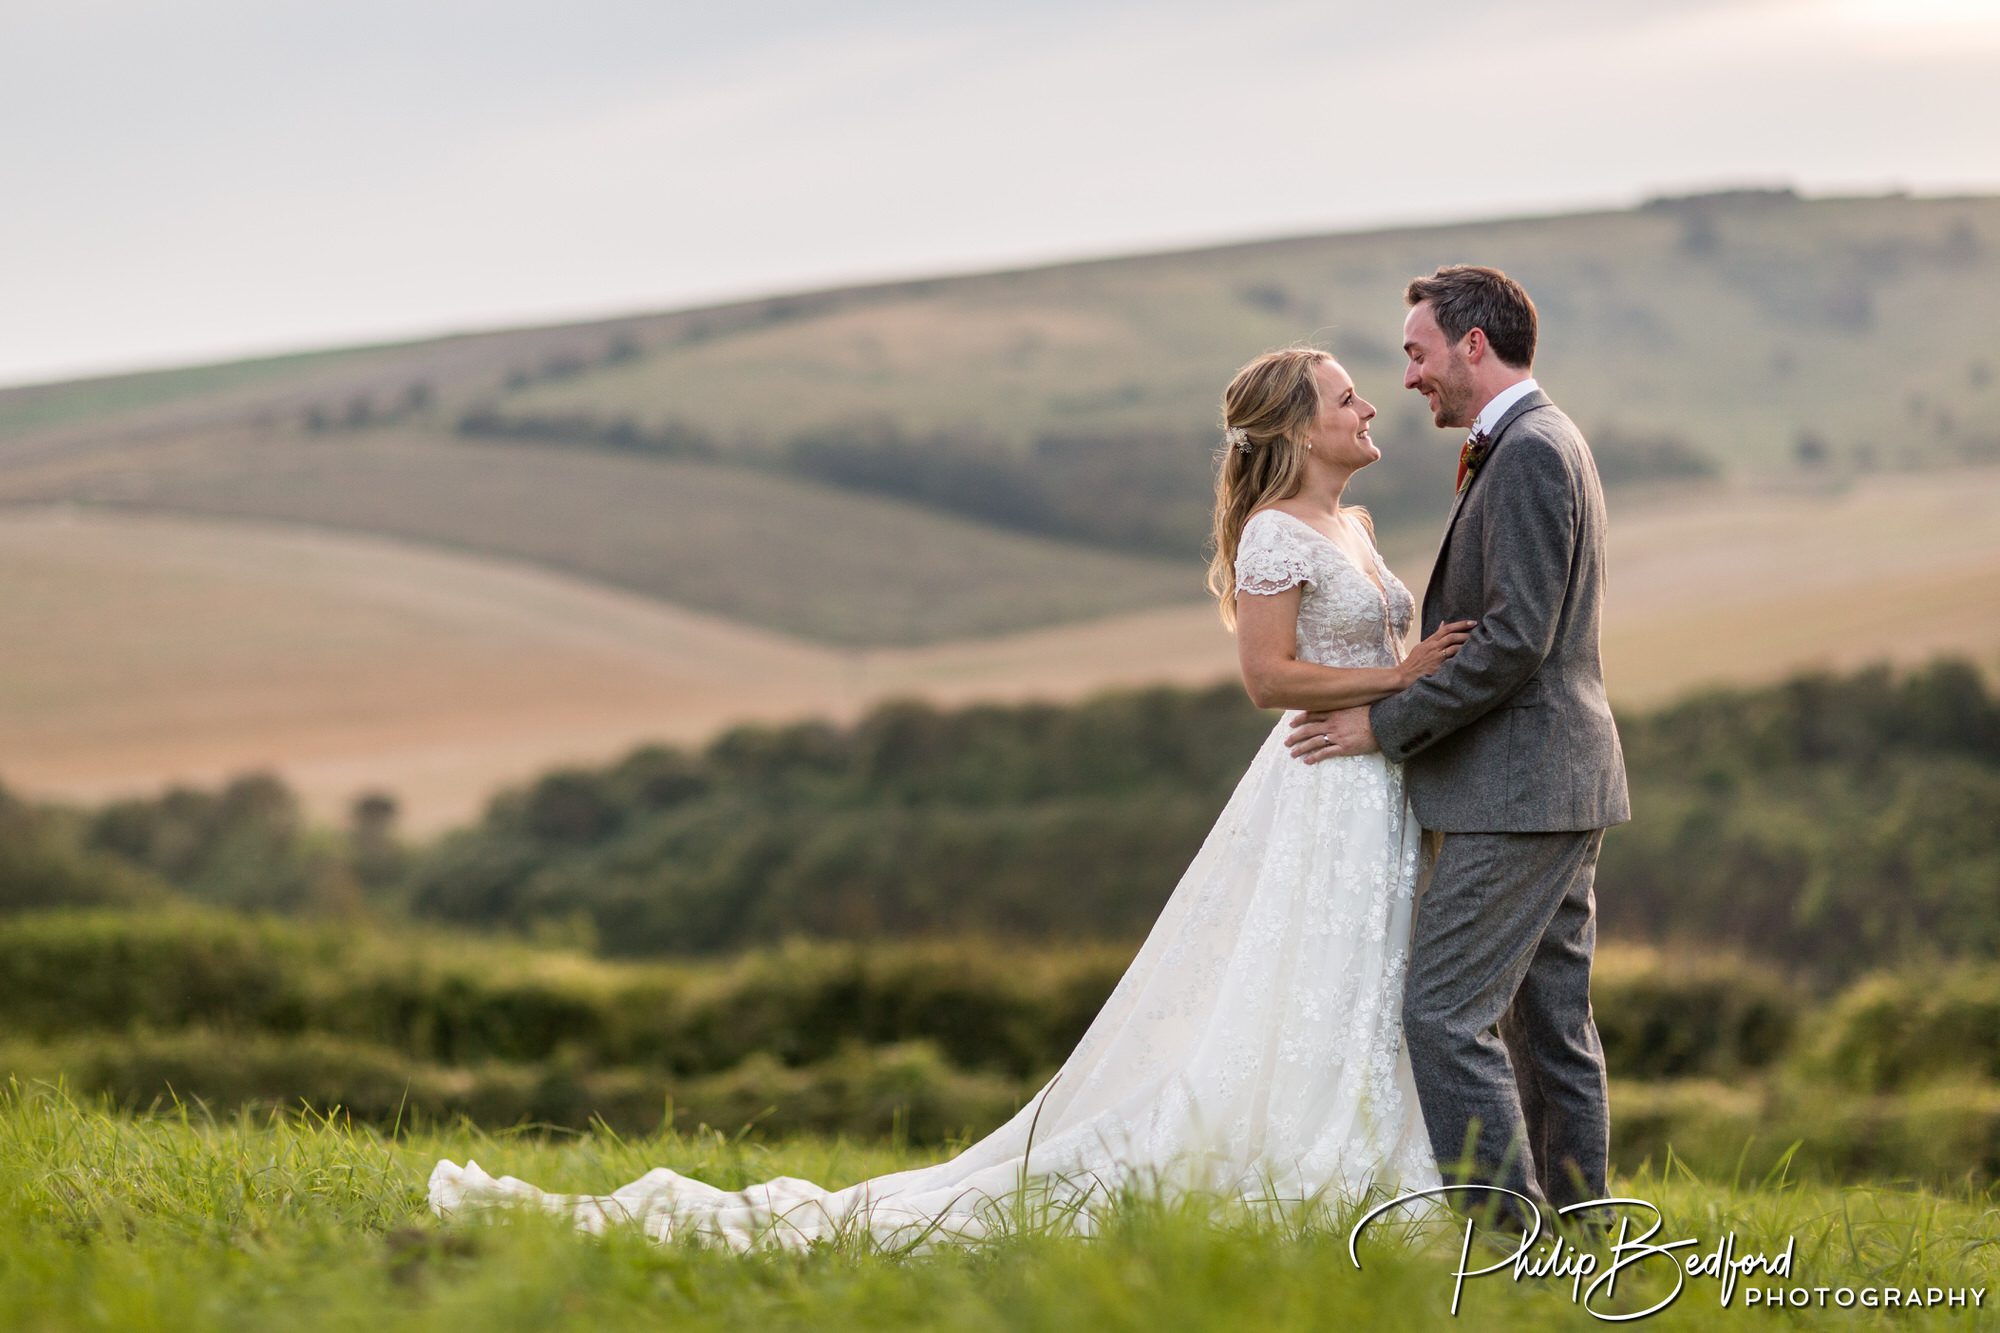 The bride and groom with the South Downs in the background at a Pangdean Barn Wedding